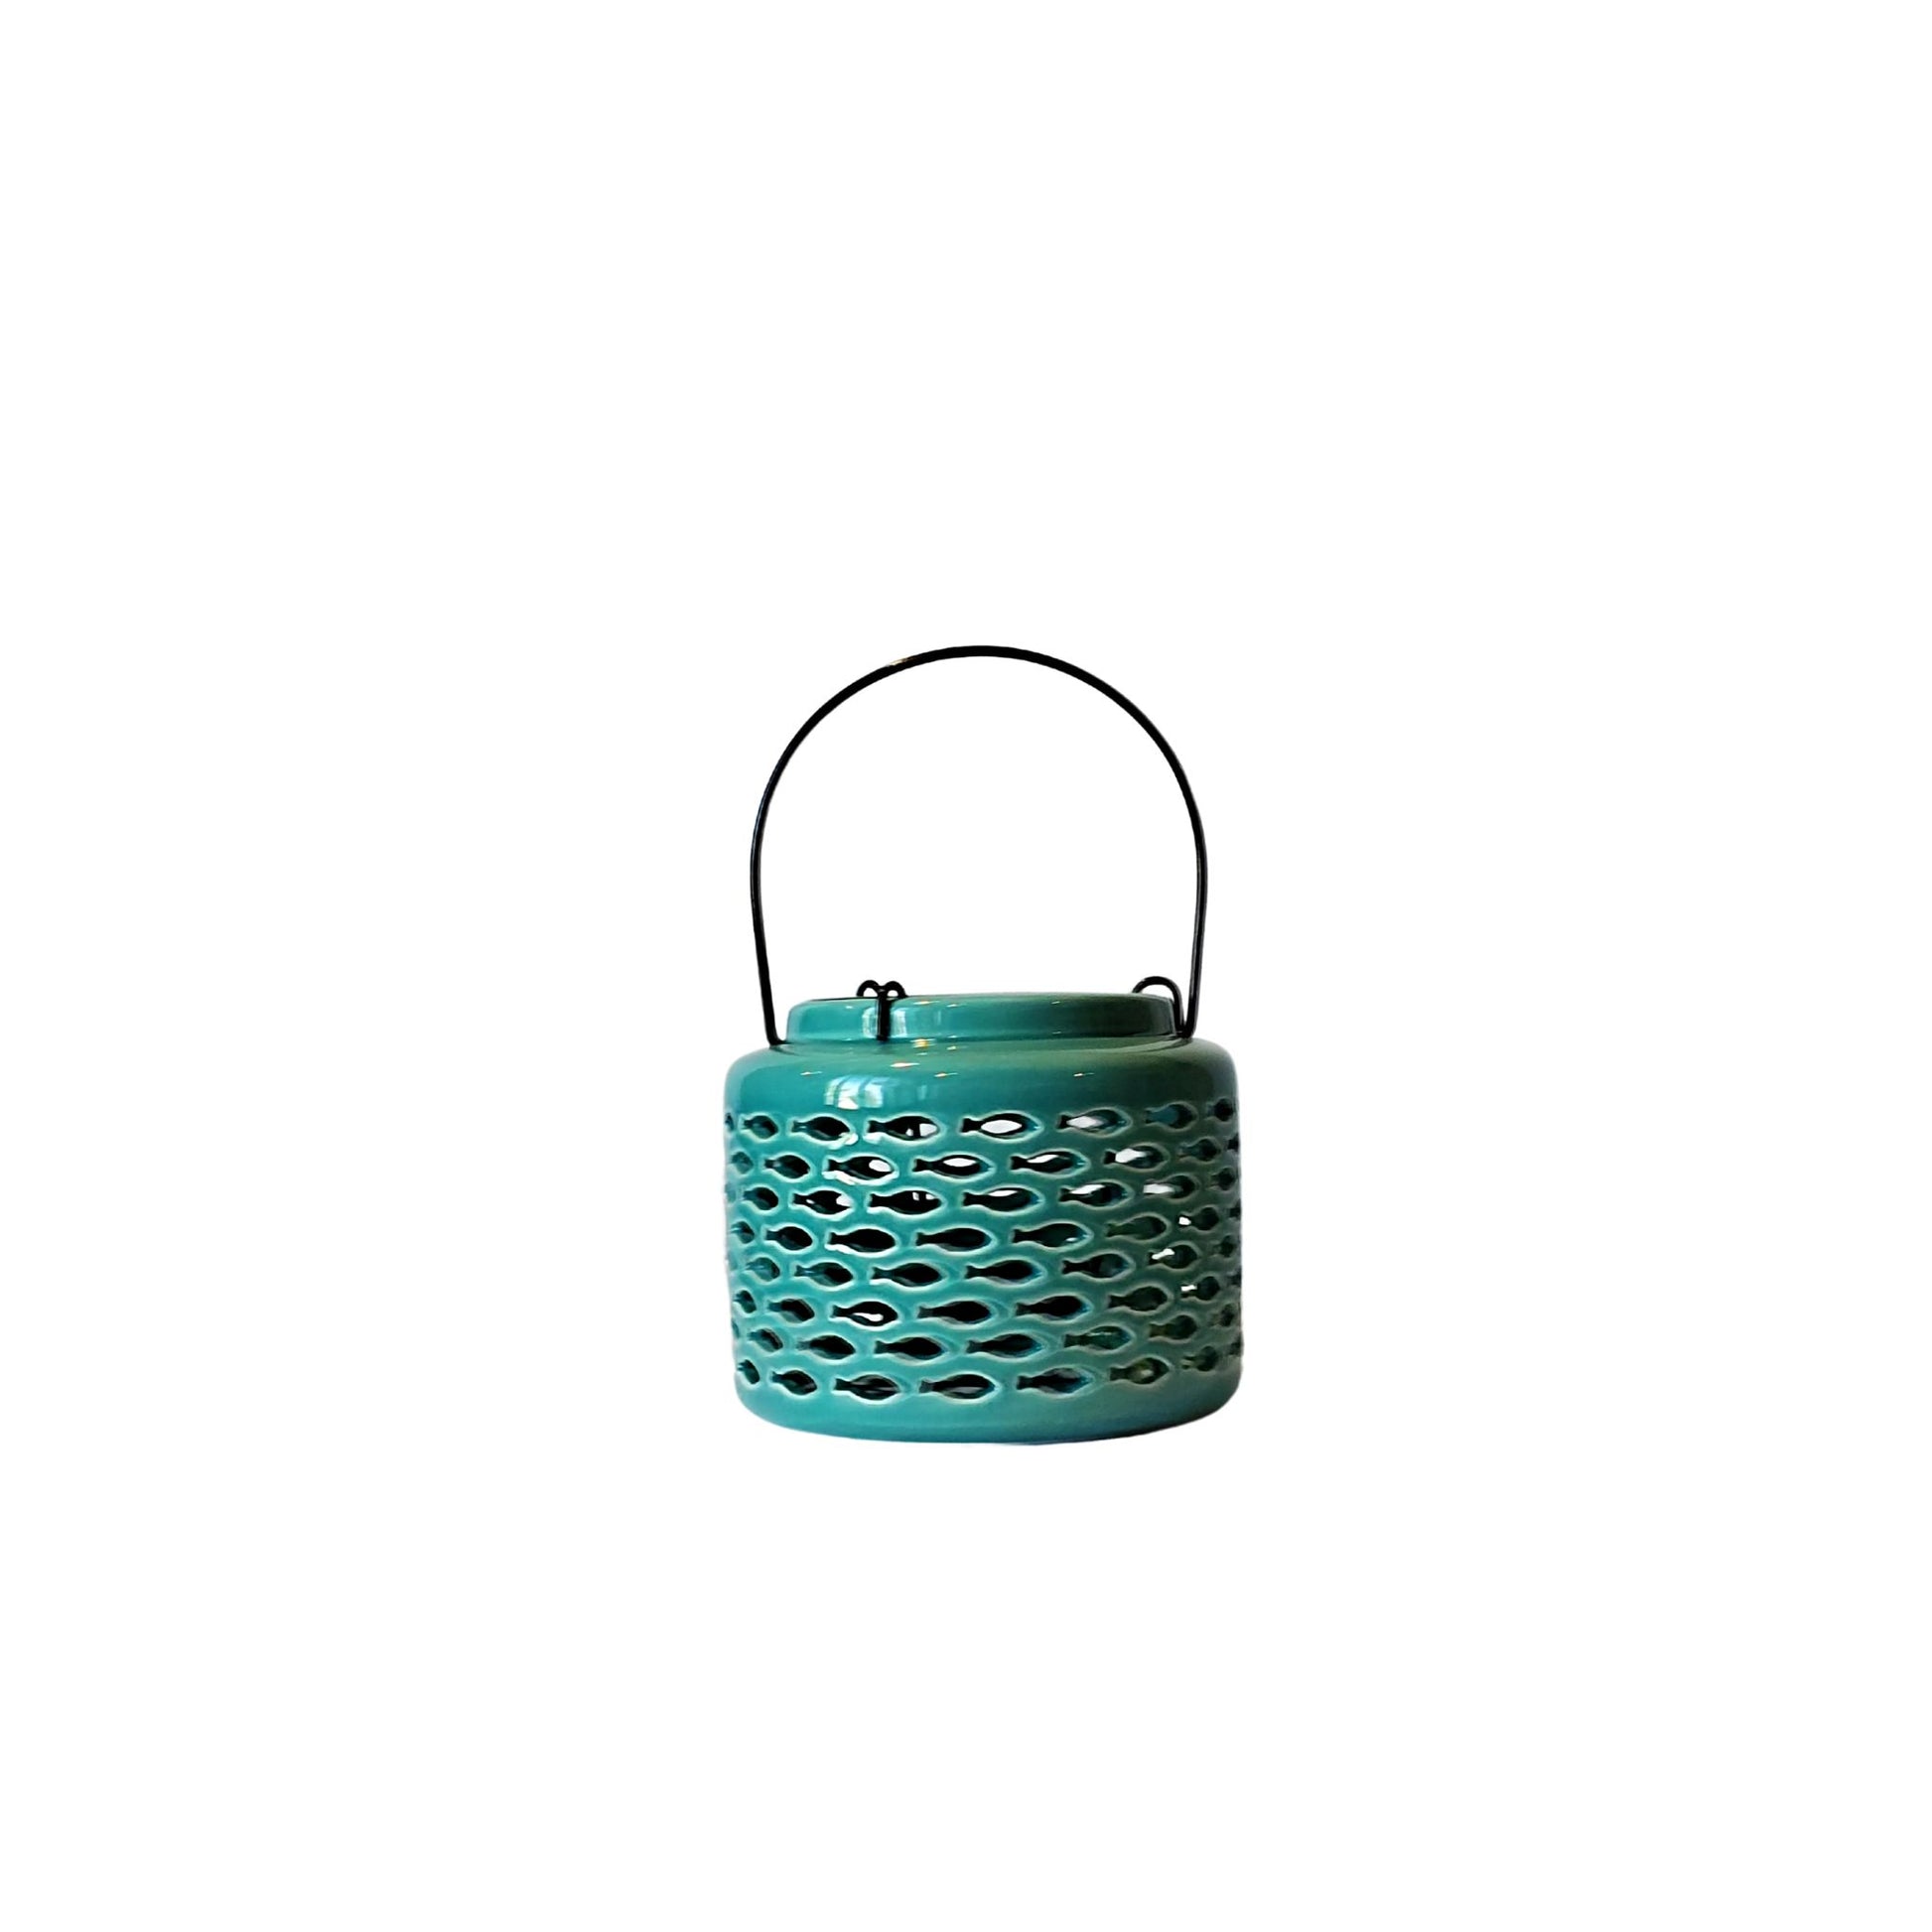 Aquamarine colored lantern, uniquely designed with nautical shaped cut outs that allow light from the candles to shine through.  Each lantern has a wire insert that holds the candle in the middle of the lantern and metal handle for hanging if desired.